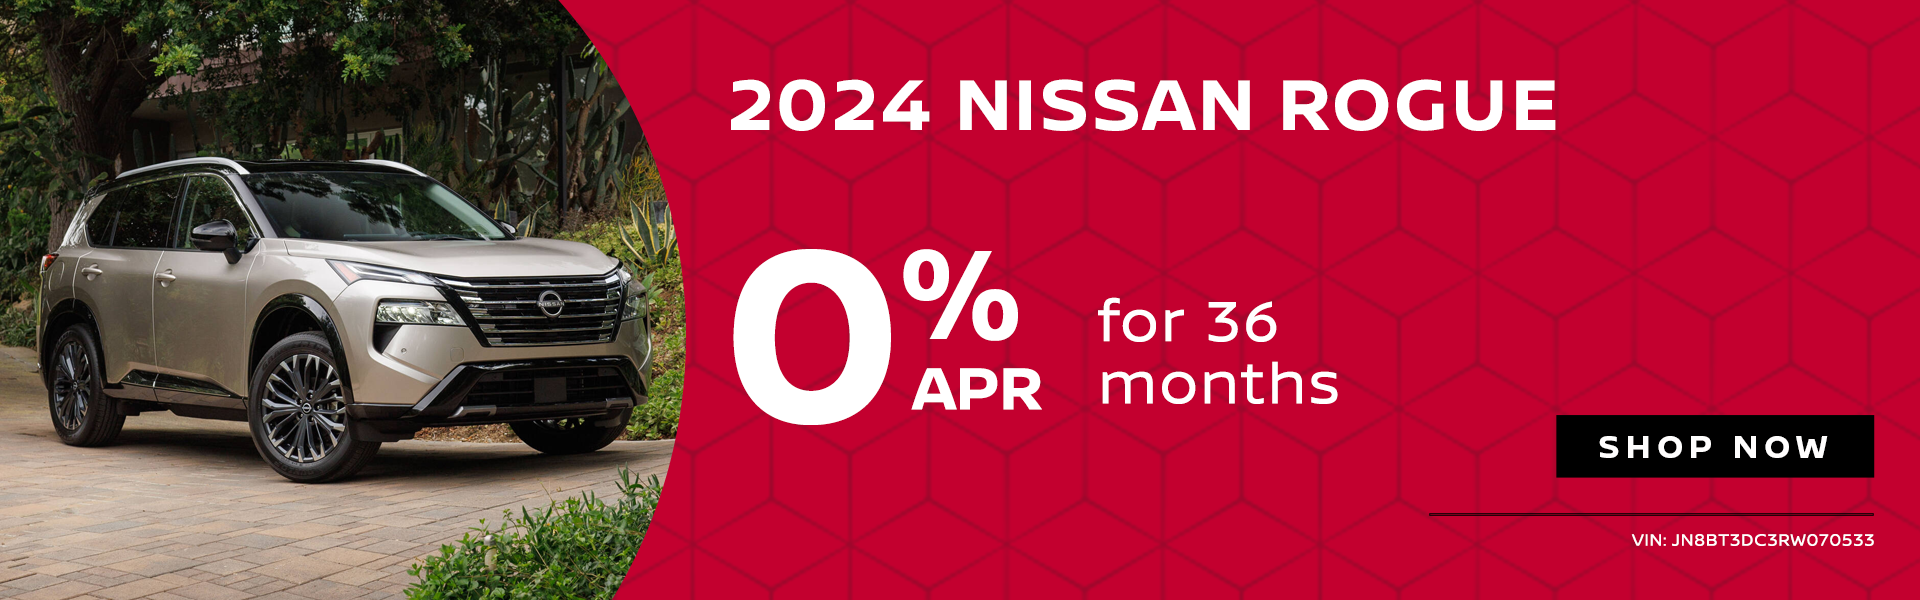 2024 Nissan Rogue 0% APR for 36 months